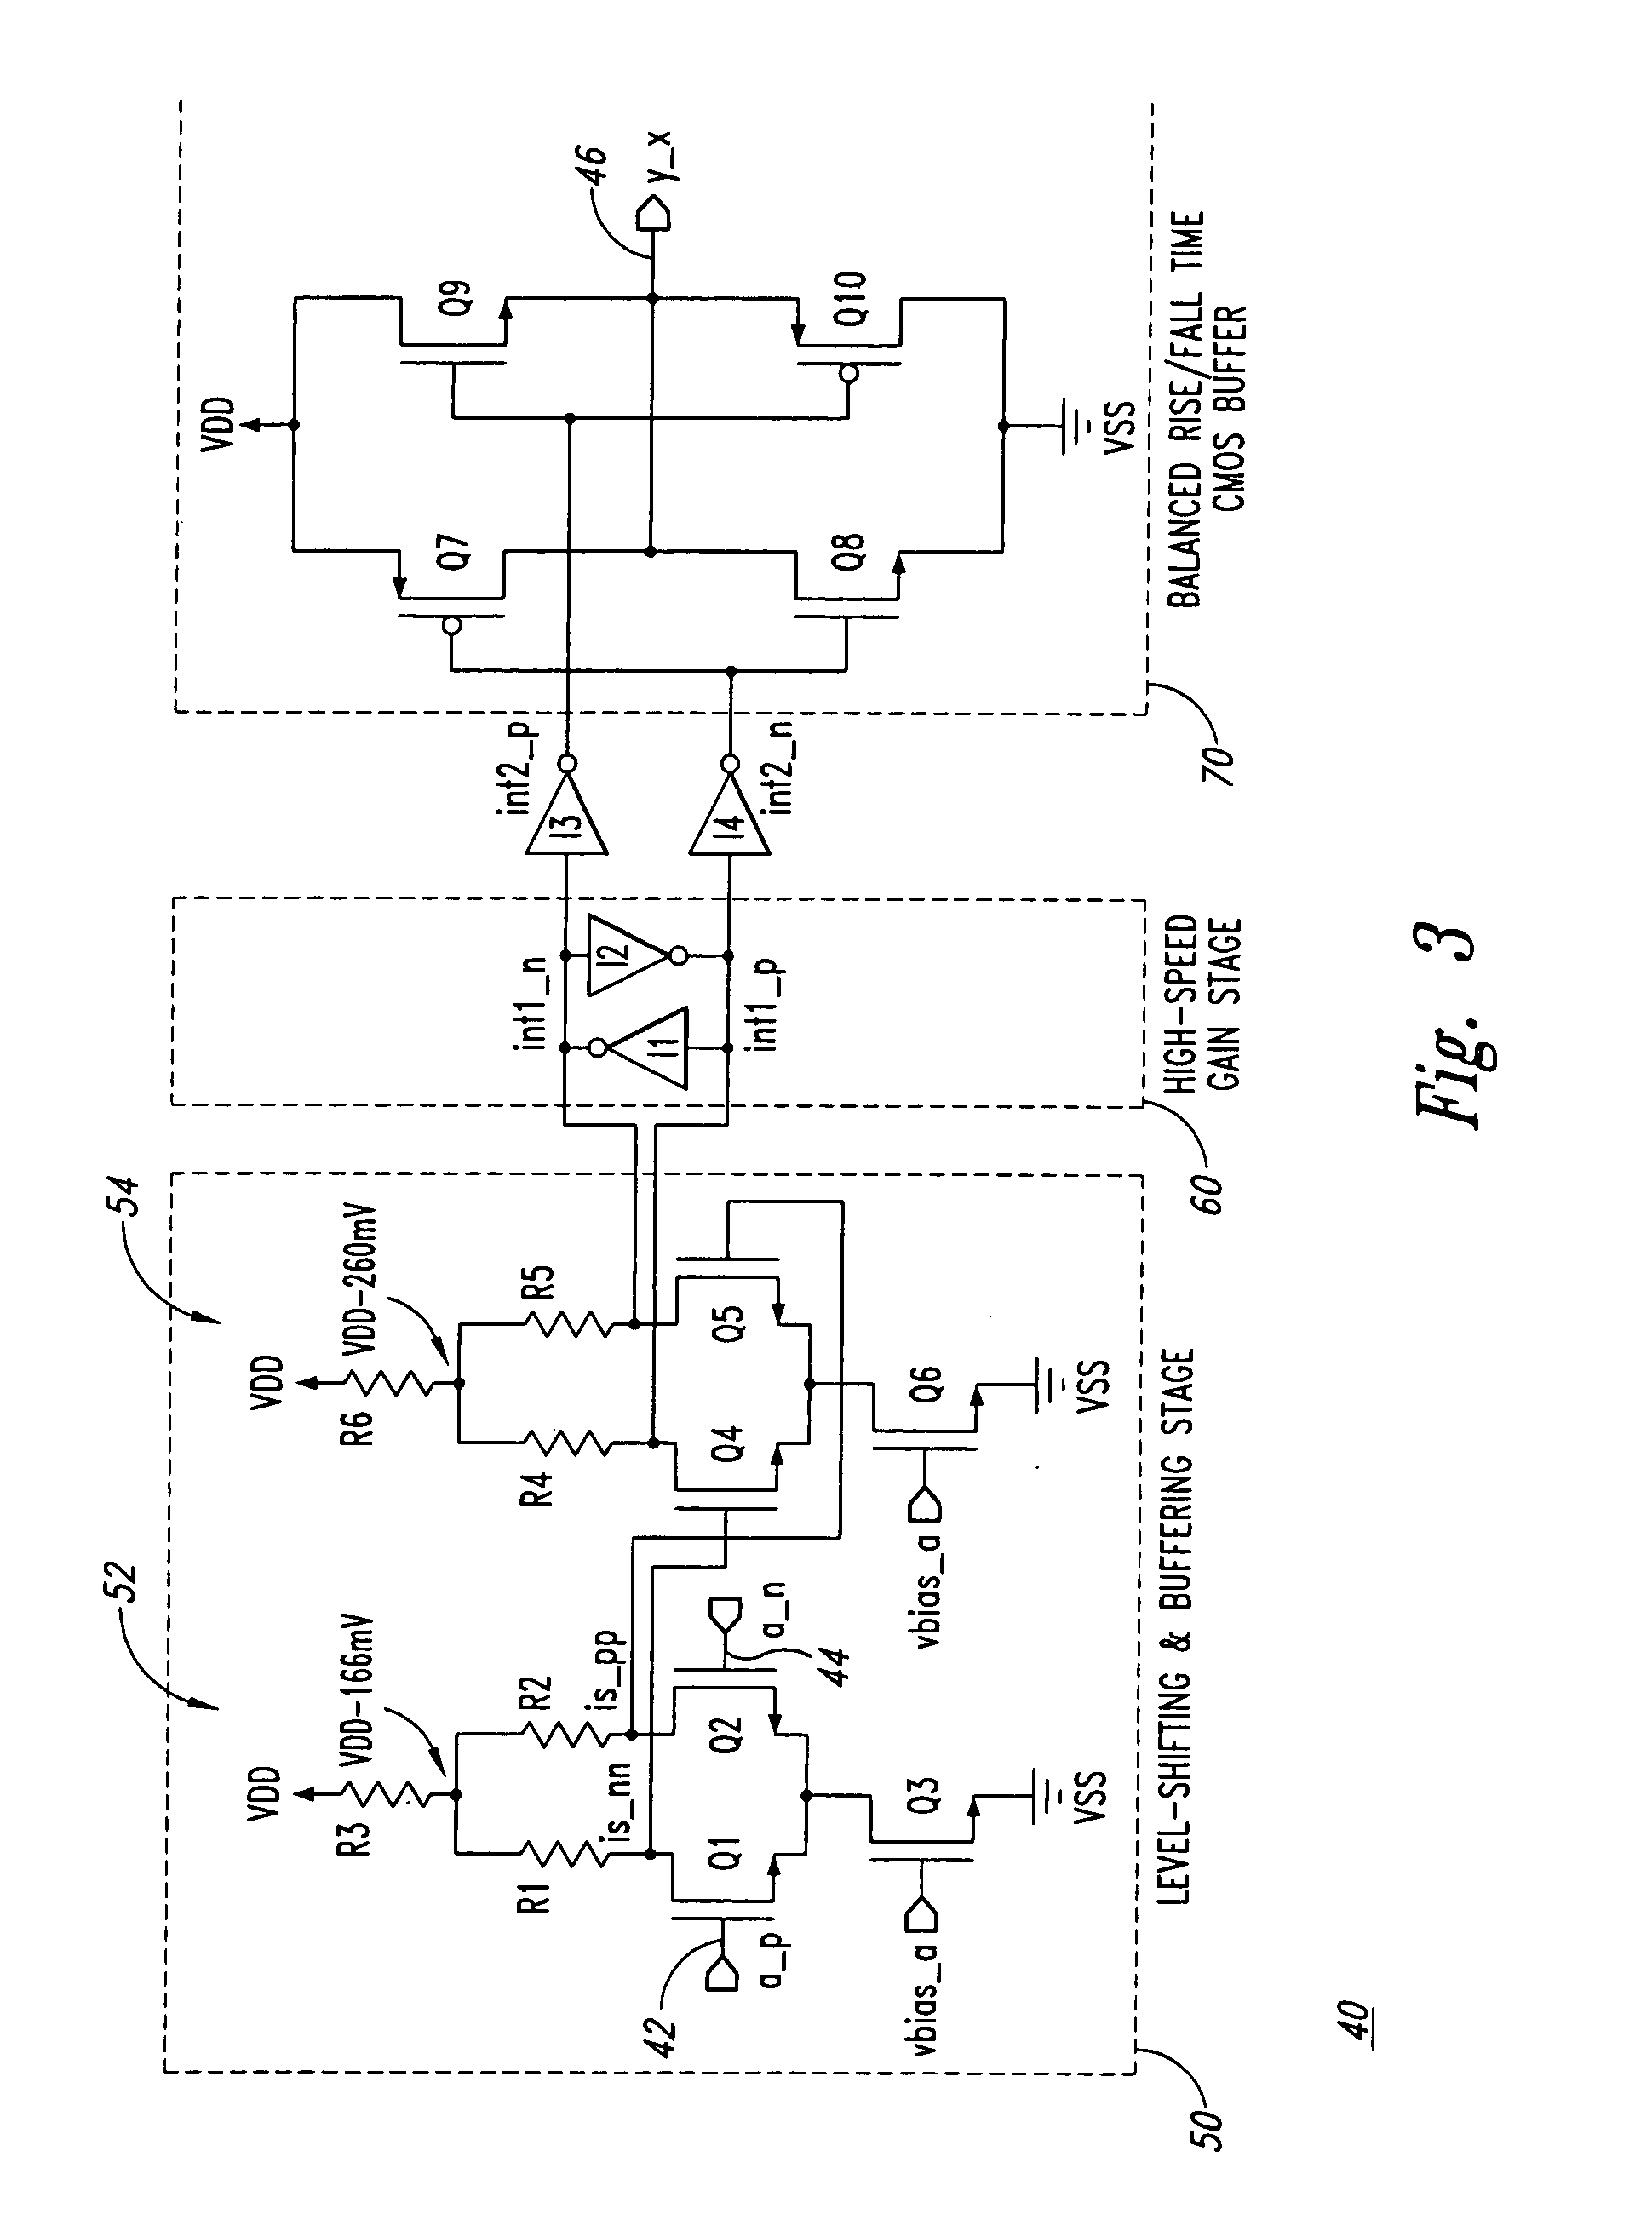 High-speed differential logic to CMOS translator architecture with low data-dependent jitter and duty cycle distortion